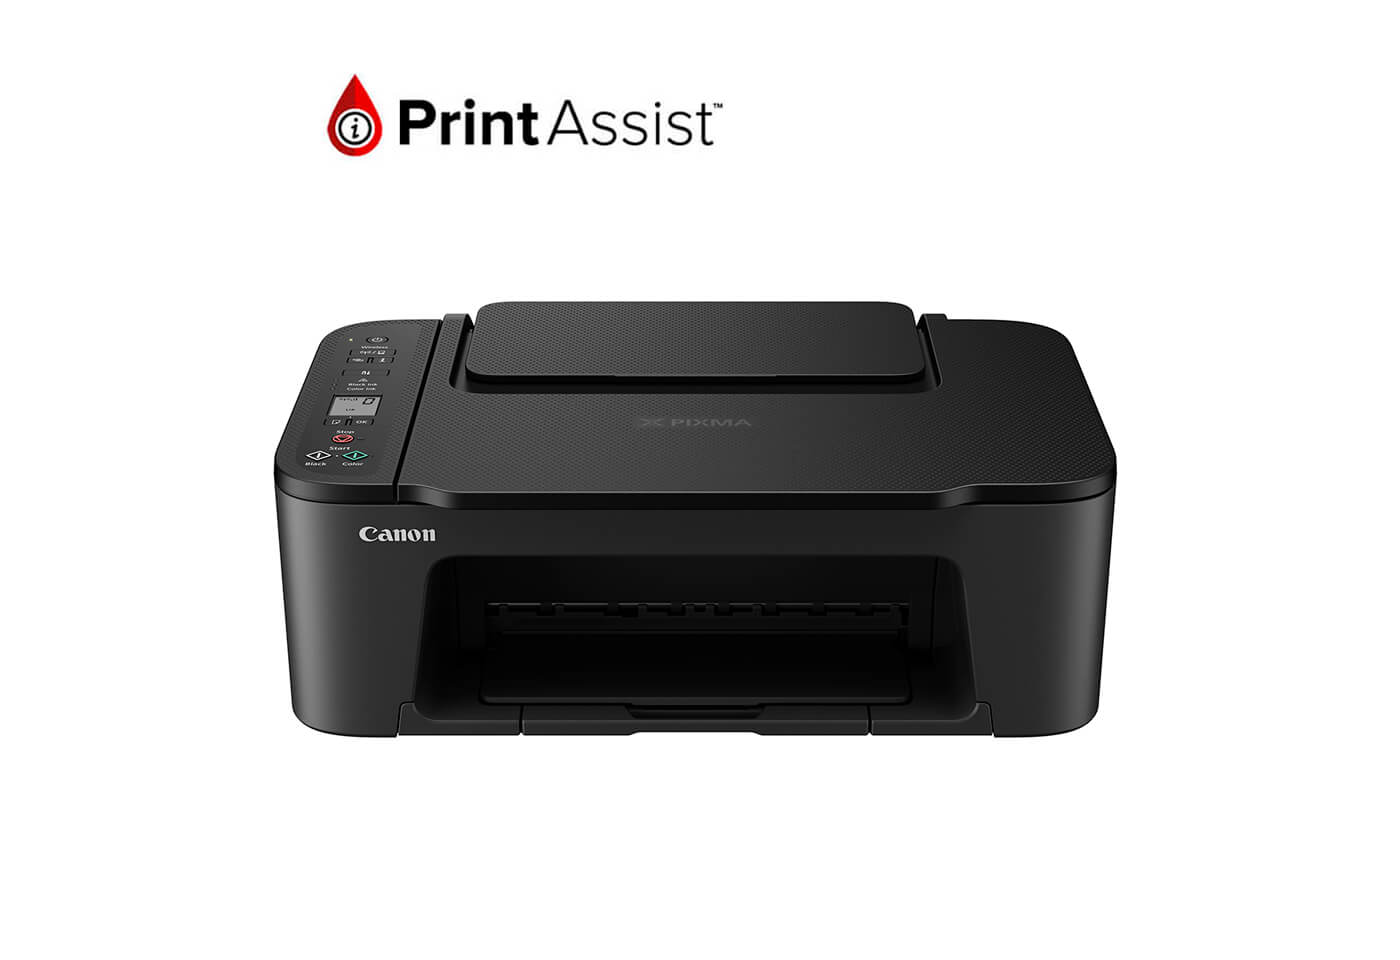 Product image of PIXMA HOME TS3460 printer with Print Assist